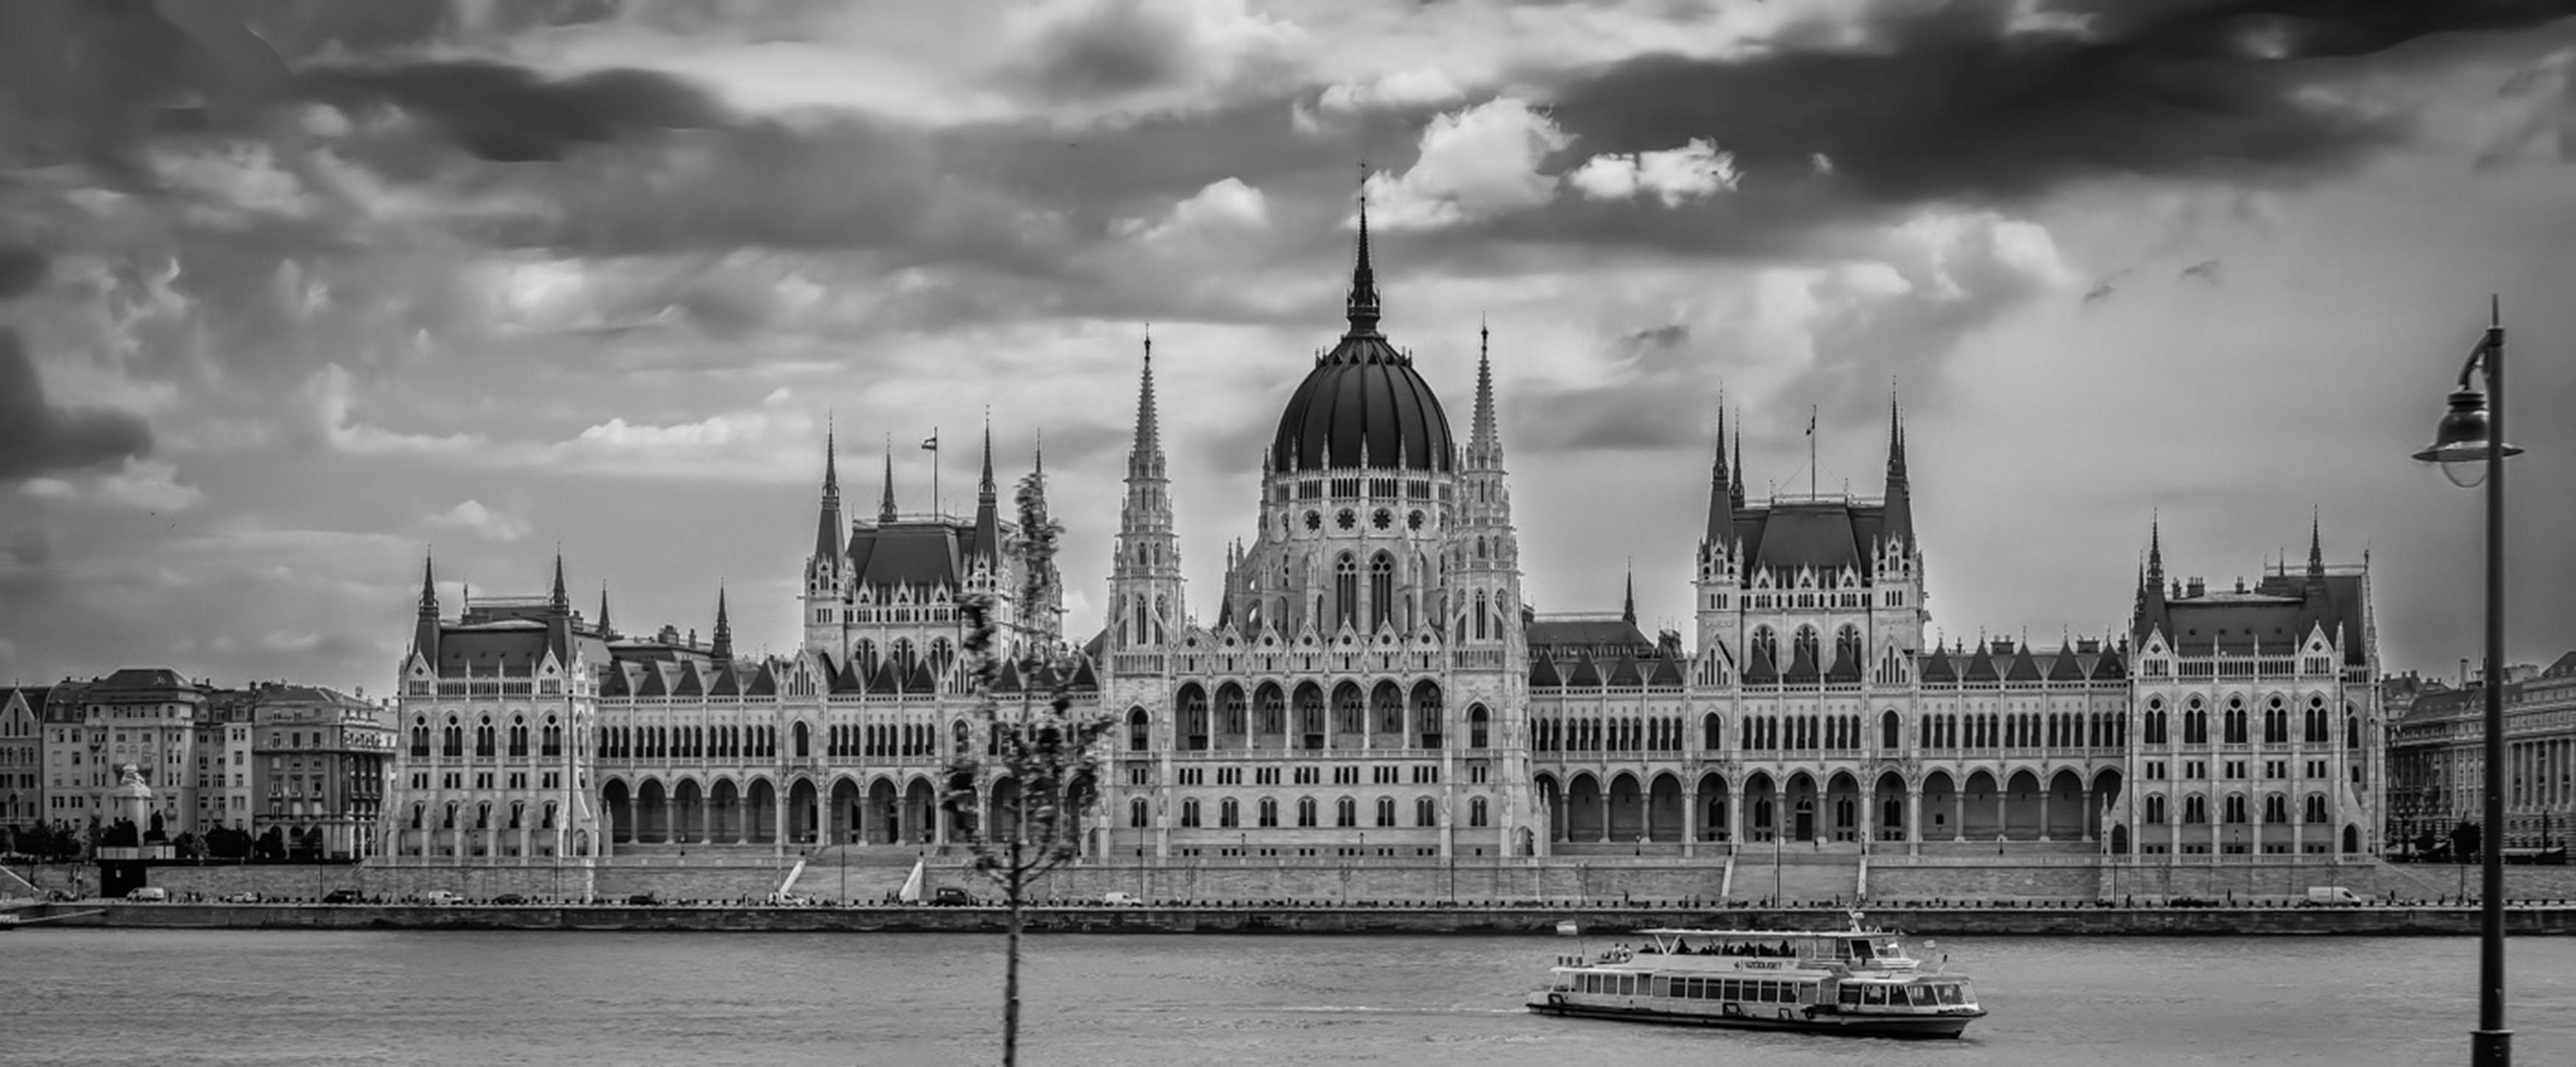 Hungarian Parliament Building by Jim Bodkin